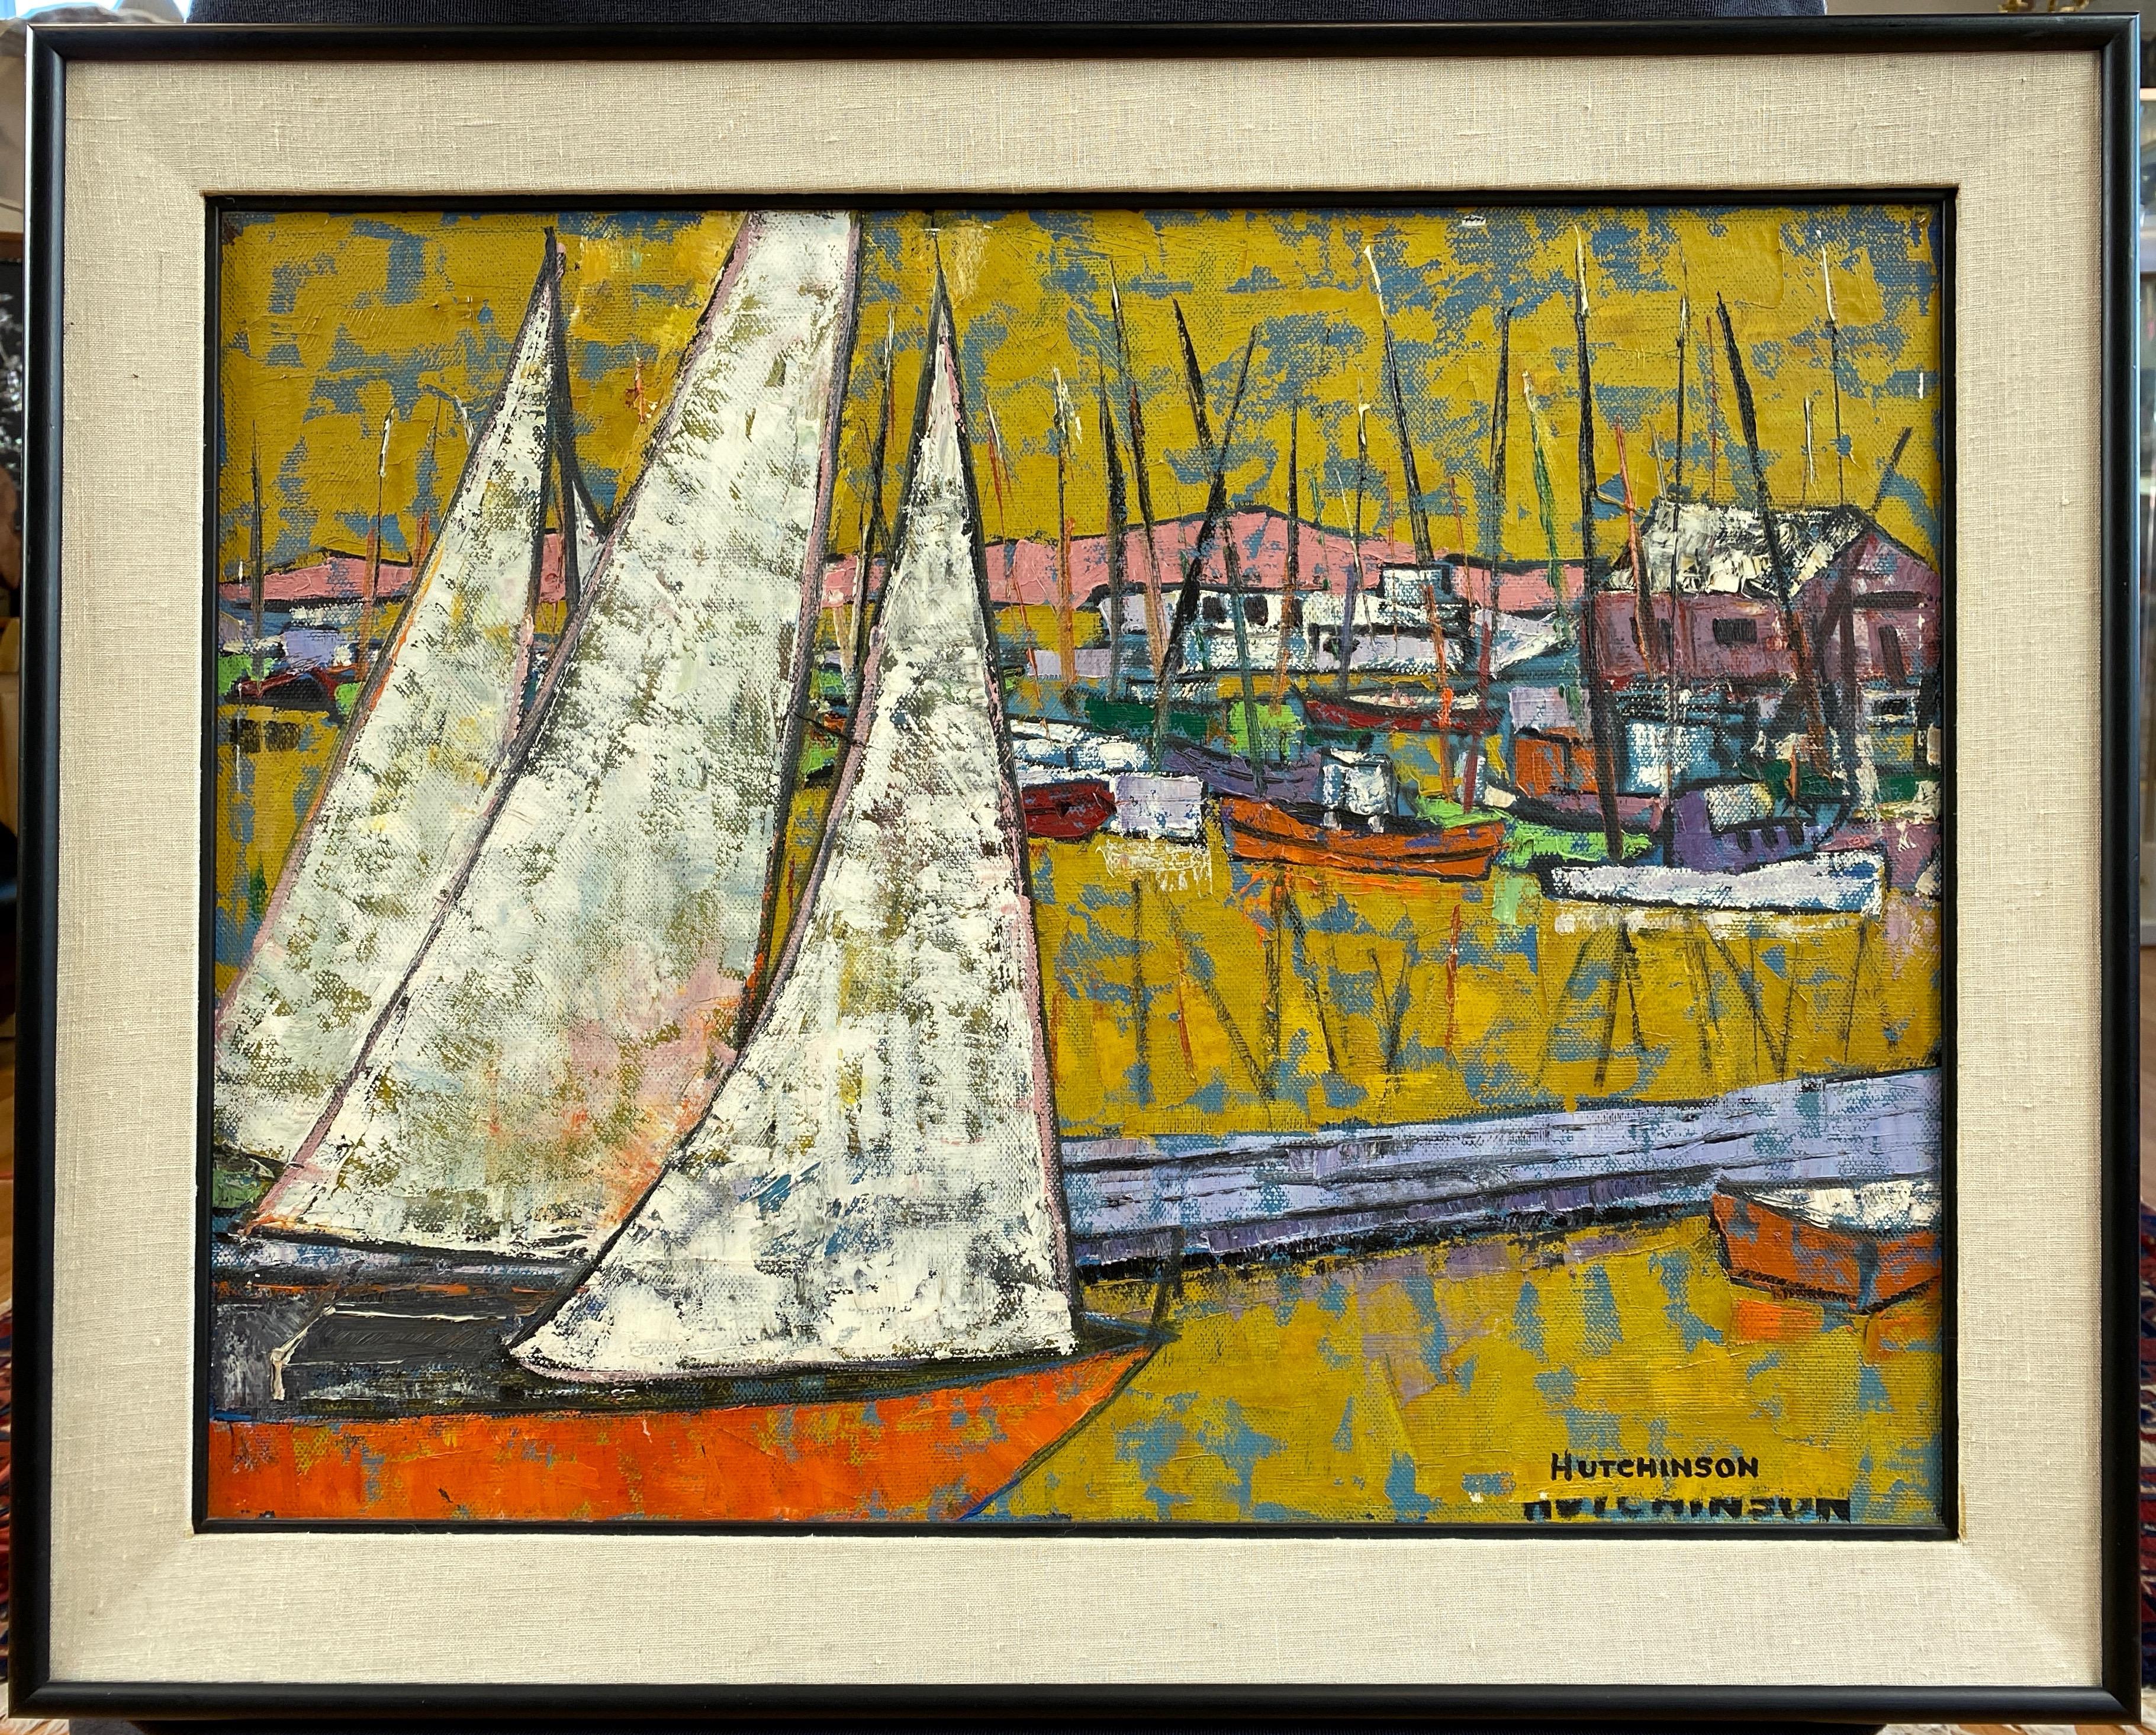 A 1950s mid-century modern expressionist acrylic painting on canvas of boats in a harbor, signed “Hutchinson